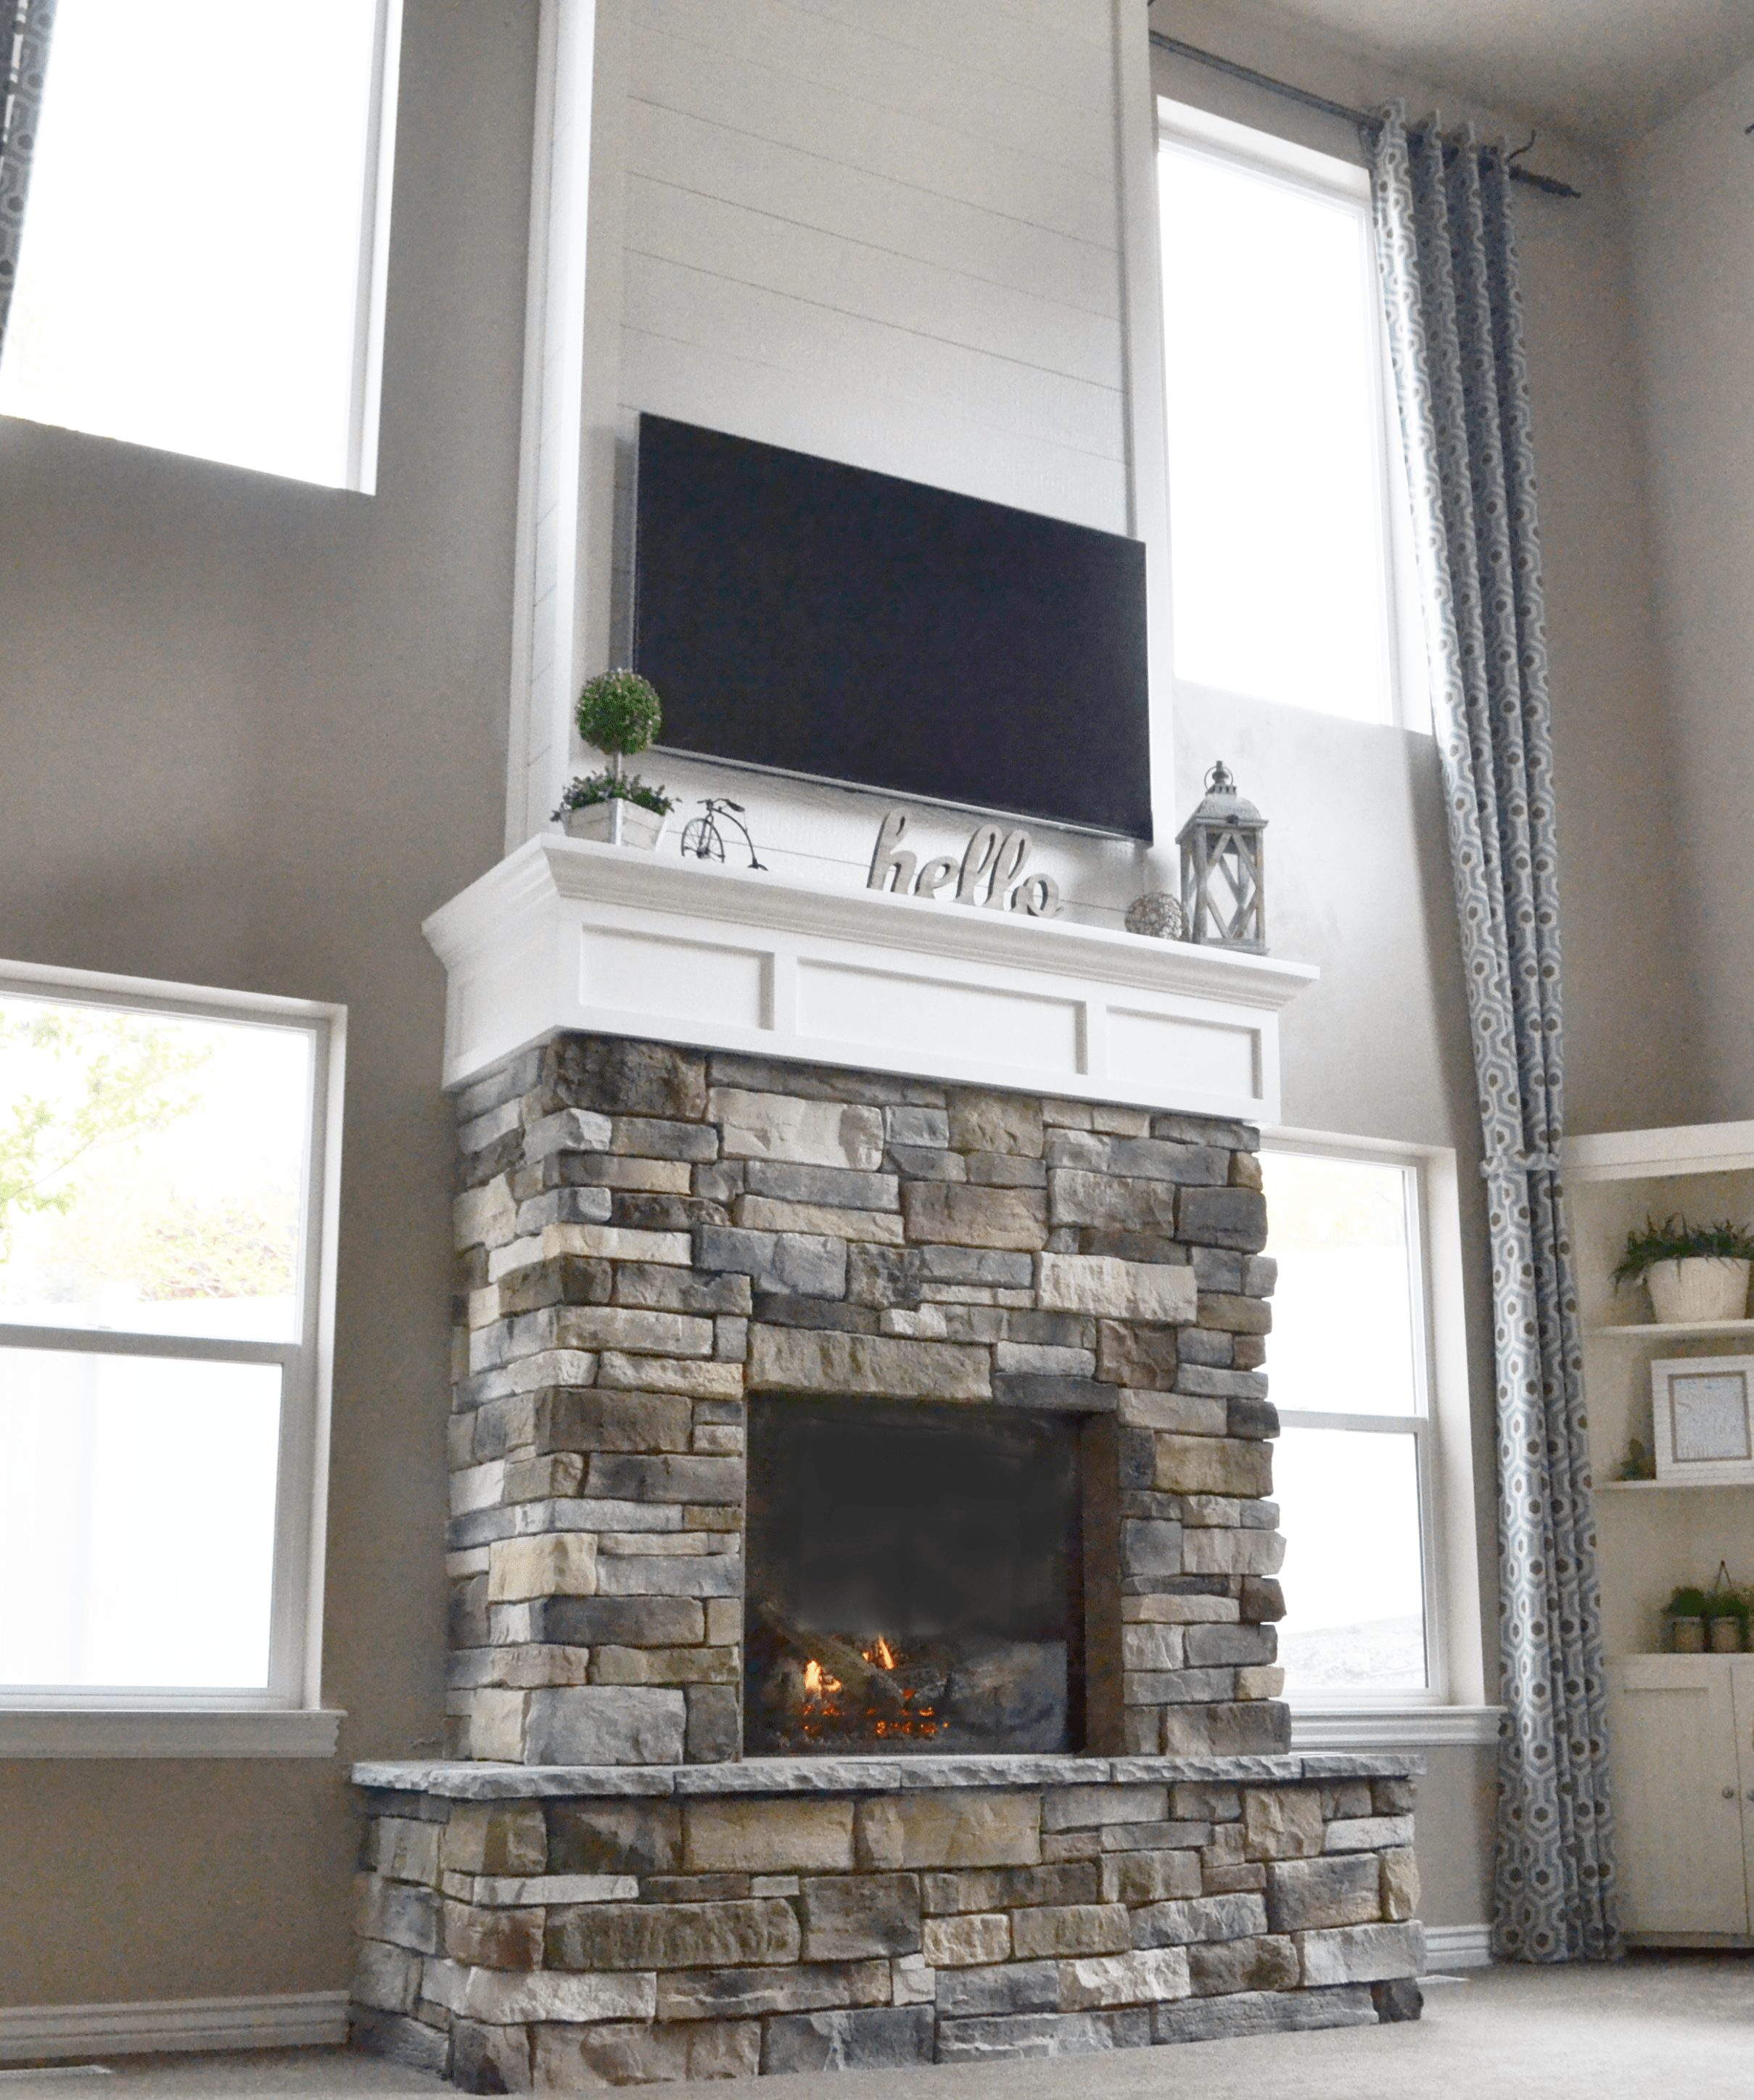 Fireplace Hearth Images Fresh Diy Fireplace with Stone & Shiplap